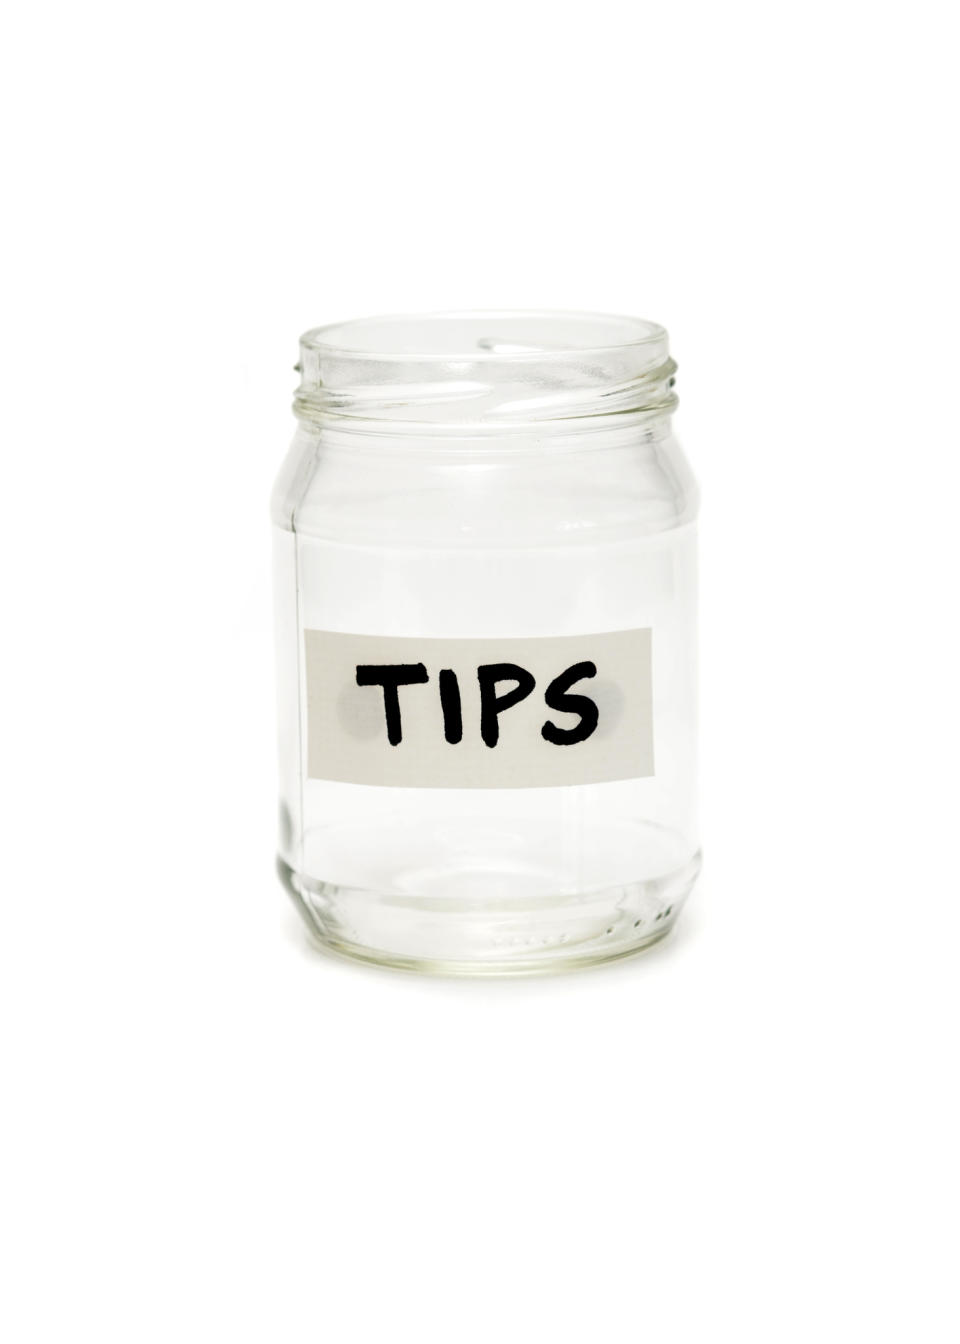 A jar that says "Tips"